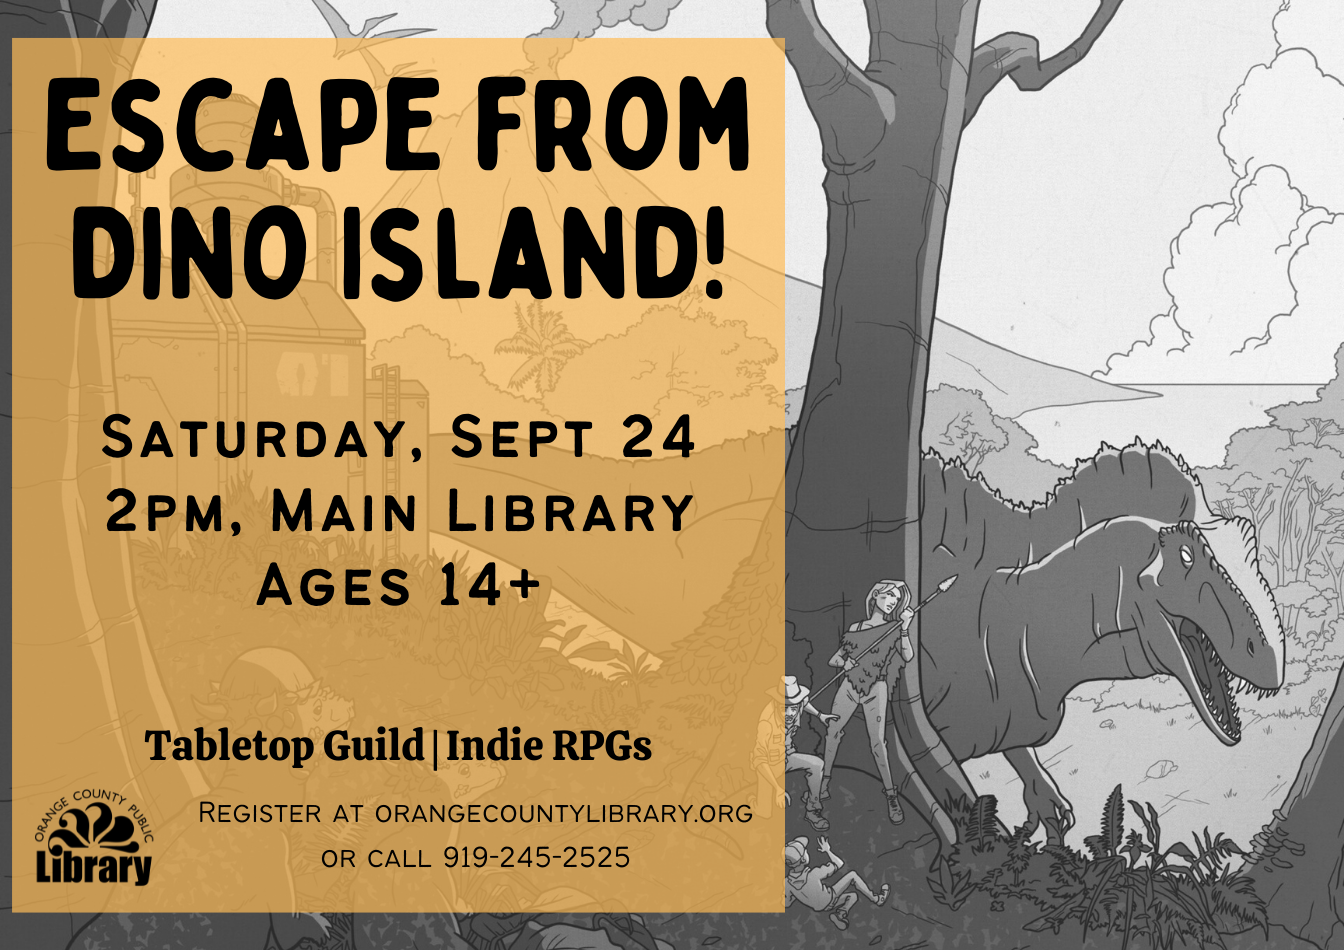 Escape from Dino Island! Saturday, September 24th, 2pm, Main Library. Ages 14+. Tabletop Guild: Indie RPGs. 